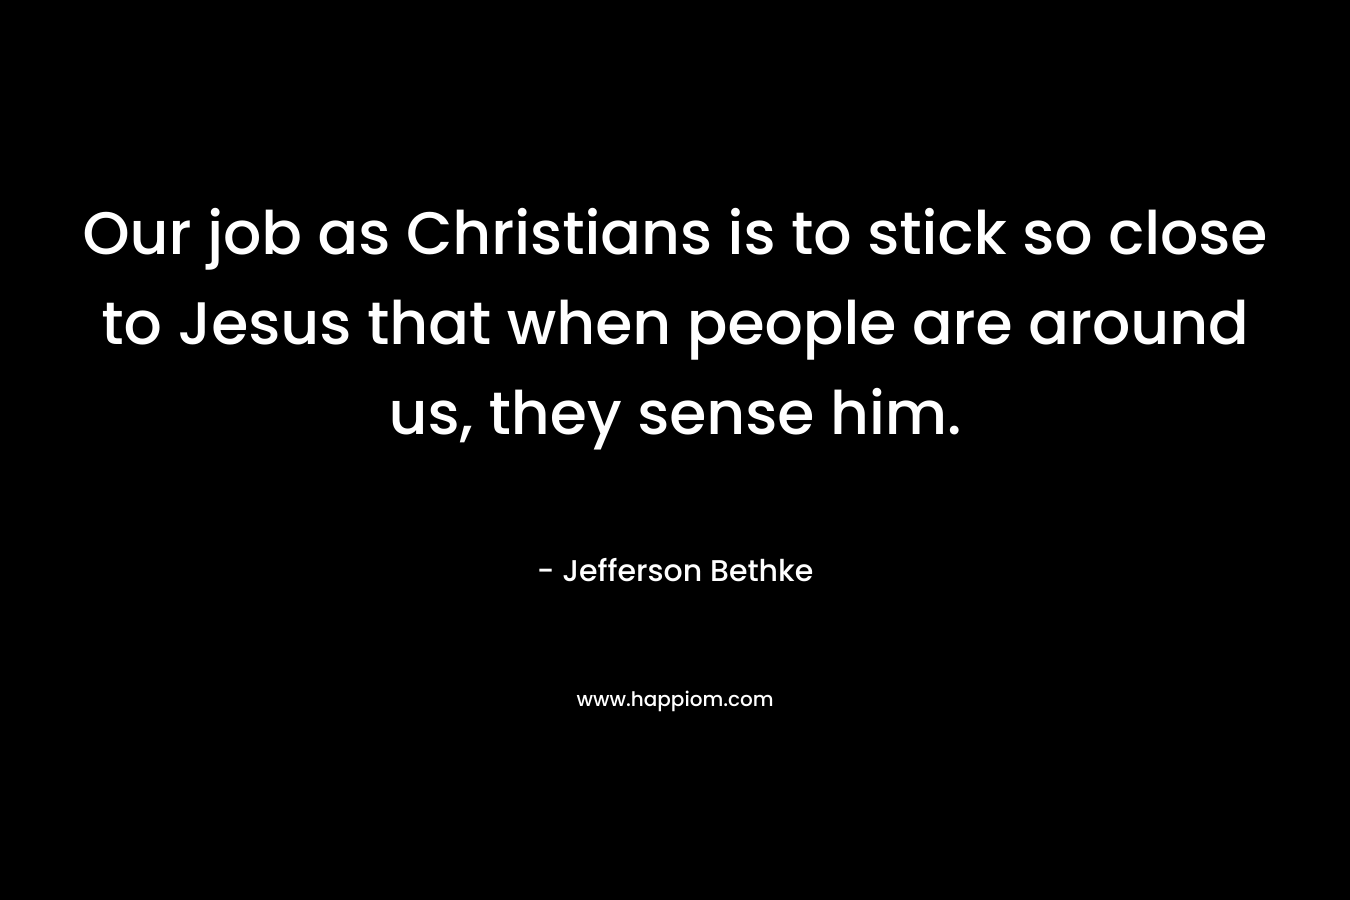 Our job as Christians is to stick so close to Jesus that when people are around us, they sense him.